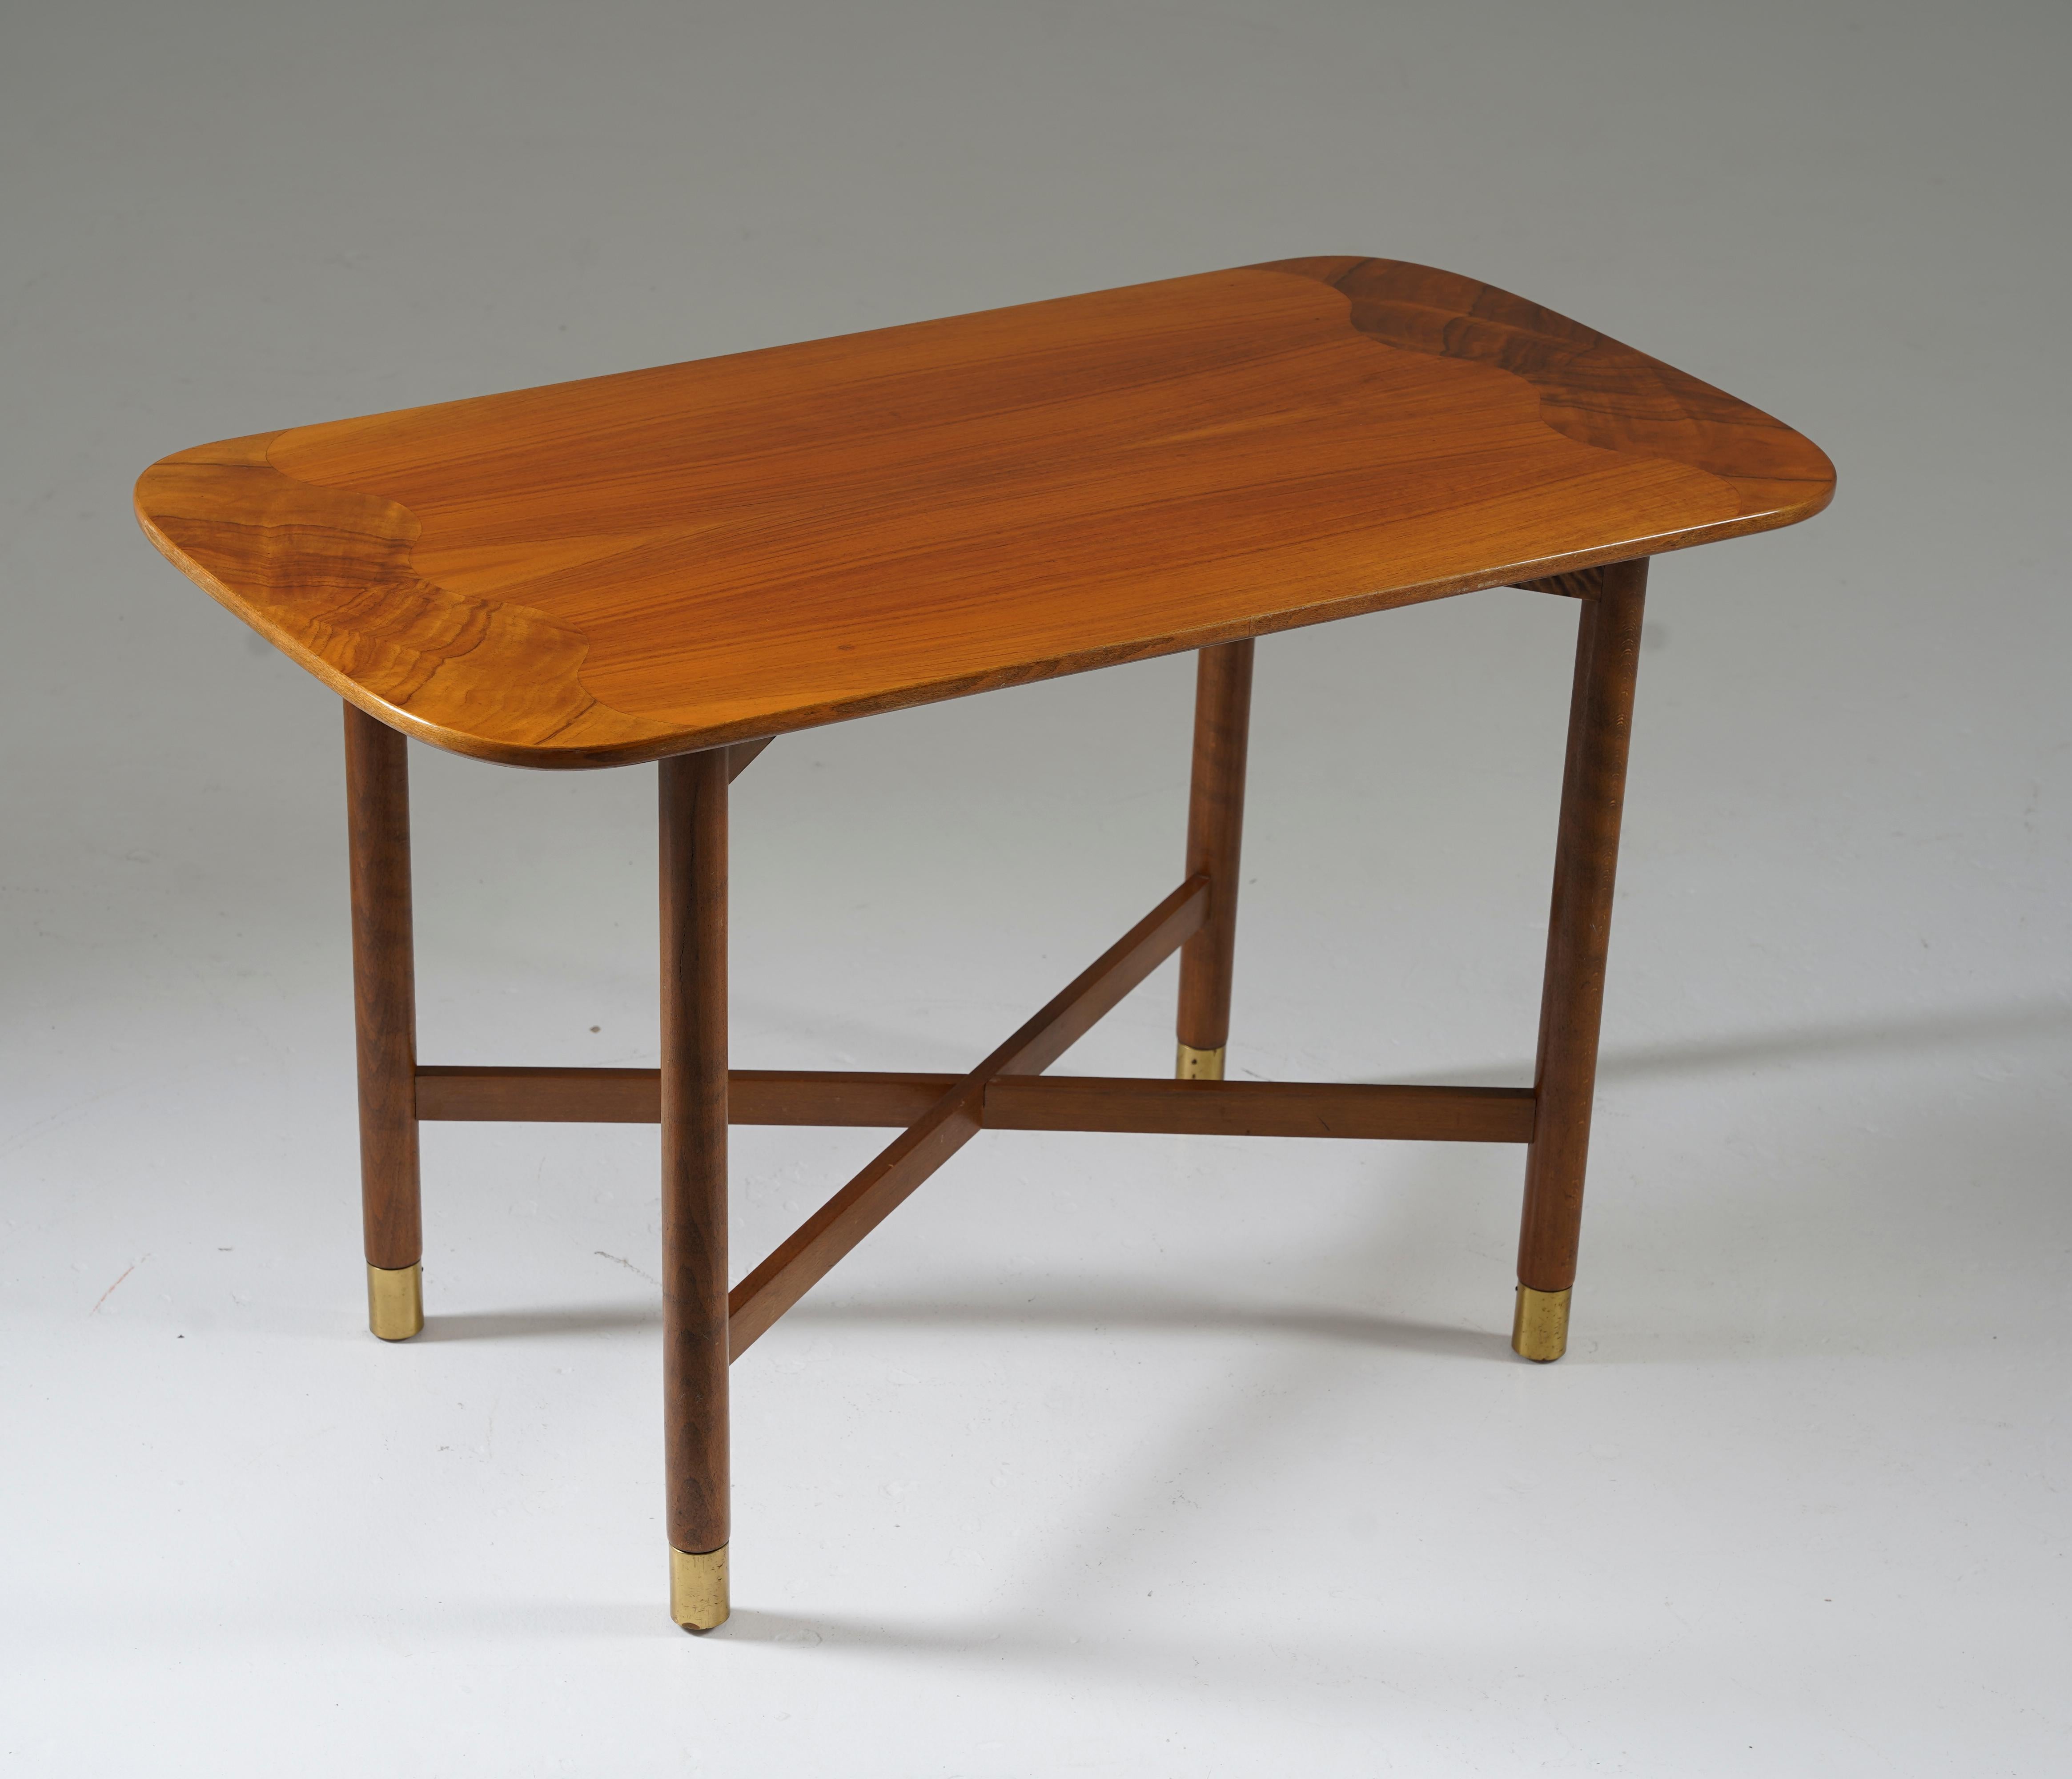 Swedish modern side table or coffee table, 1940s. 
This table offers a very clean design and superb craftsmanship, significant for the era. The wave-shaped inlays and brass details add elegance to the minimalistic design. 

Condition: Very good